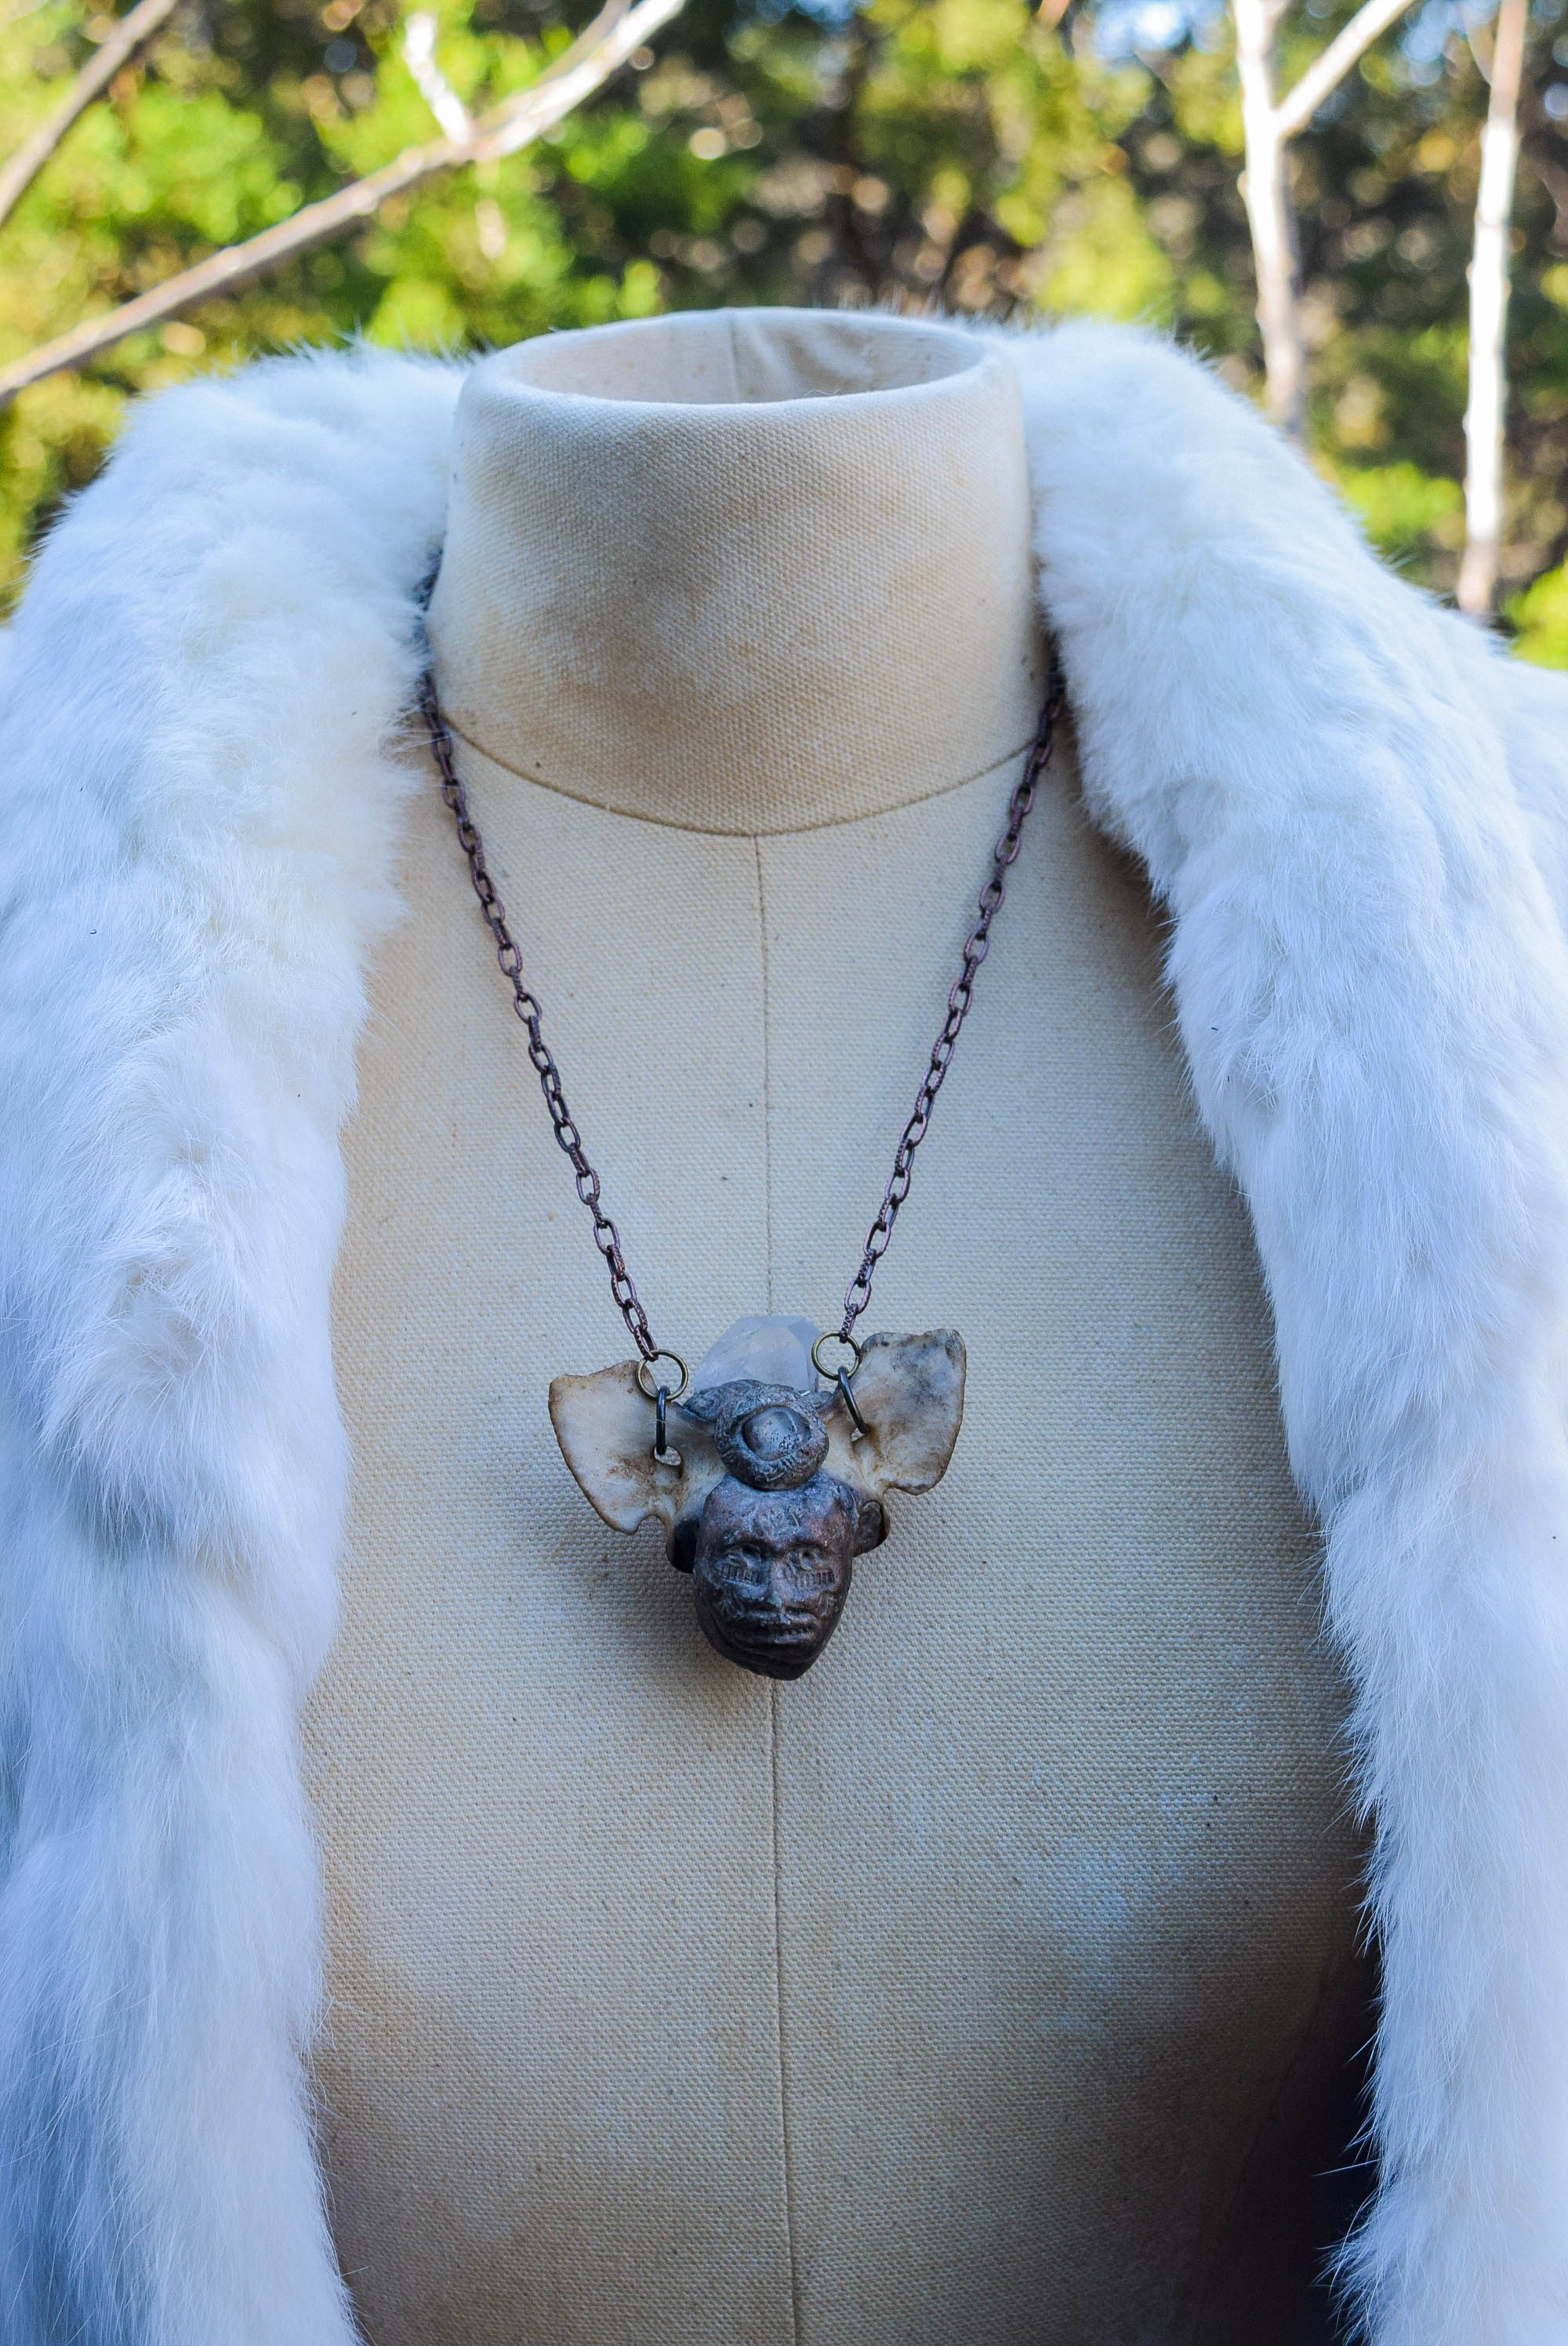 Spirit Guide Necklace for Clarity and Authenticity